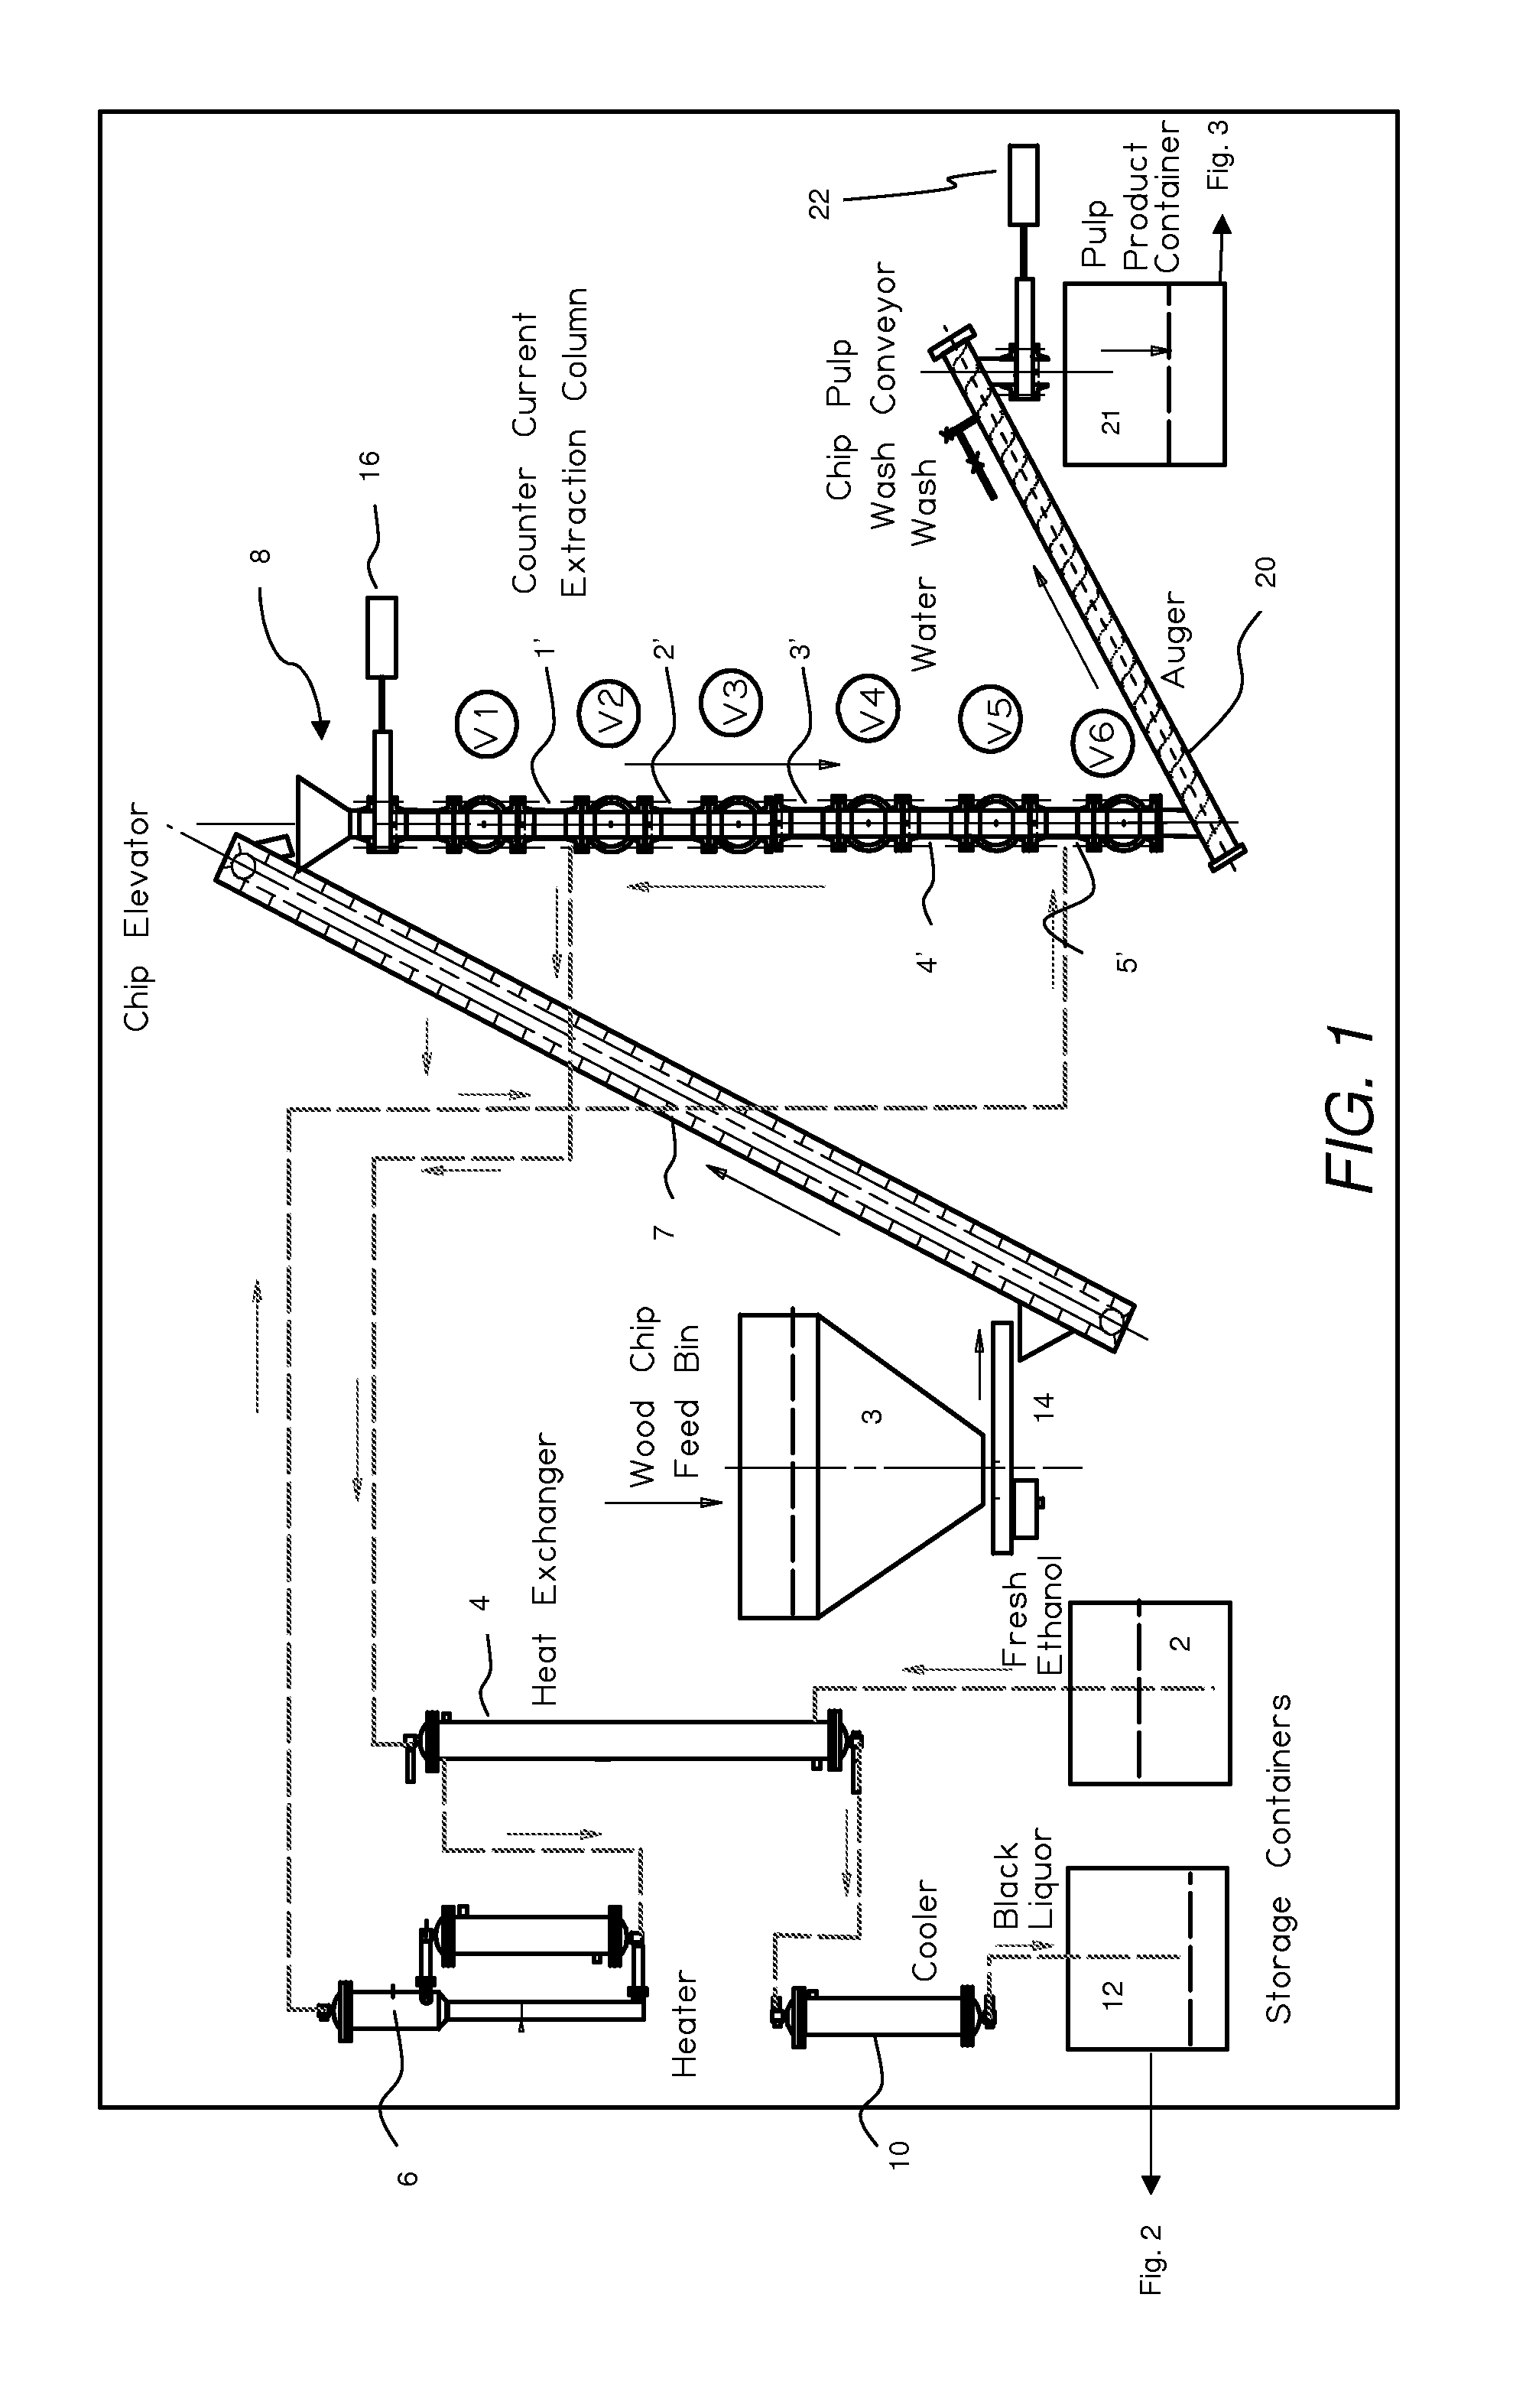 Methods and systems for processing plants and converting cellulosic residue to crude bio-oils